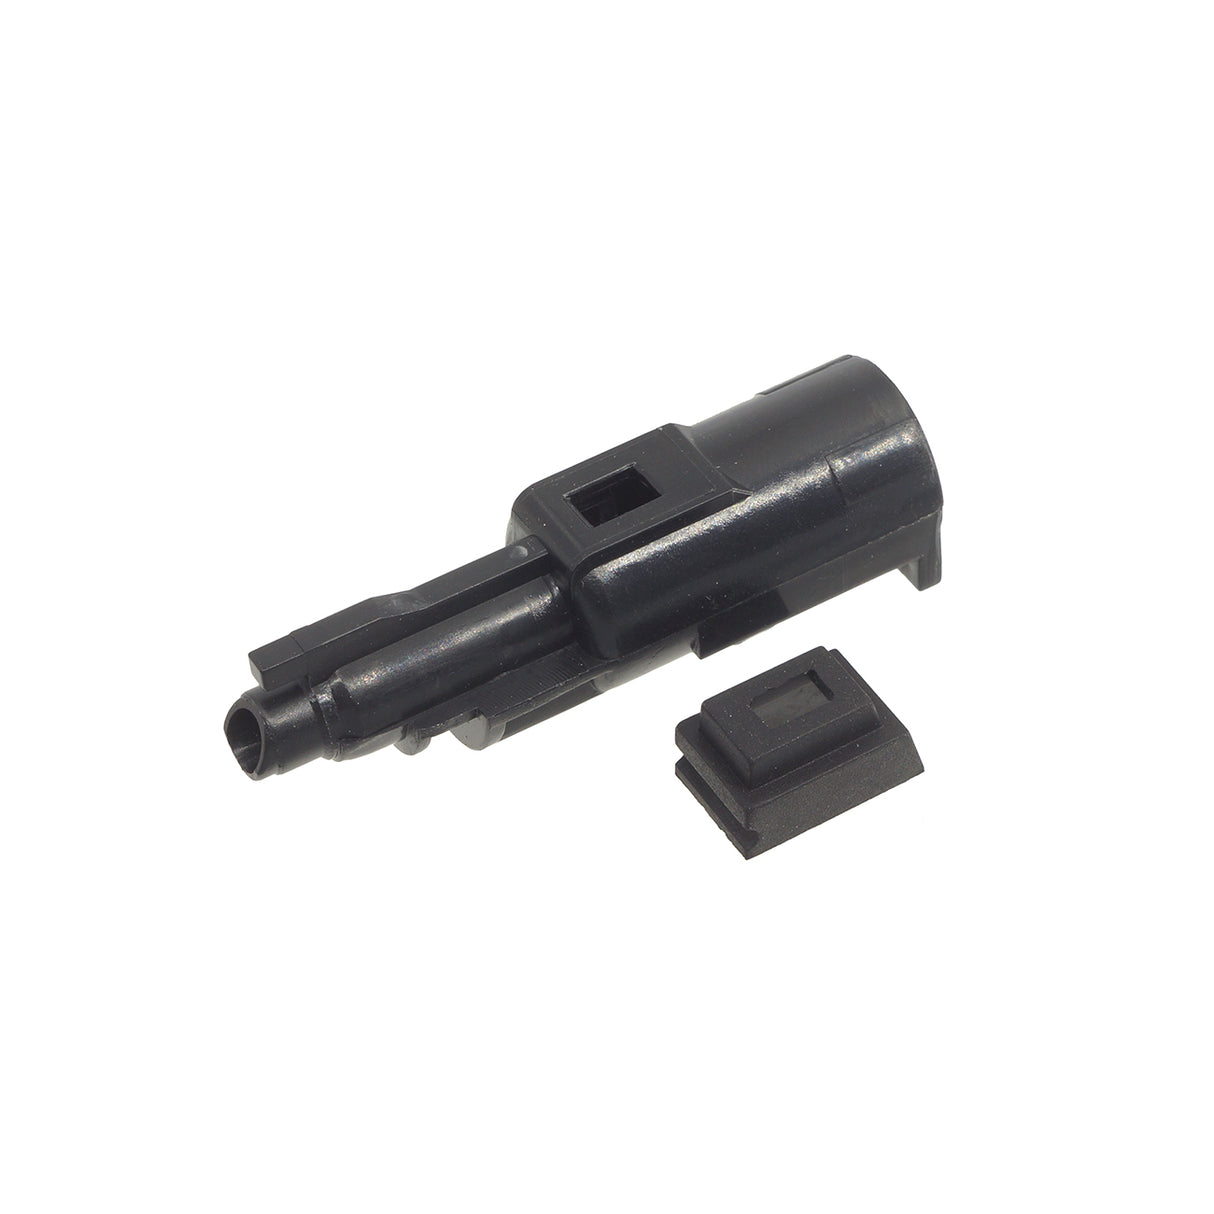 E&C Loading Nozzle Set and Rubber for EC G-Series ( EC-PA1058 )